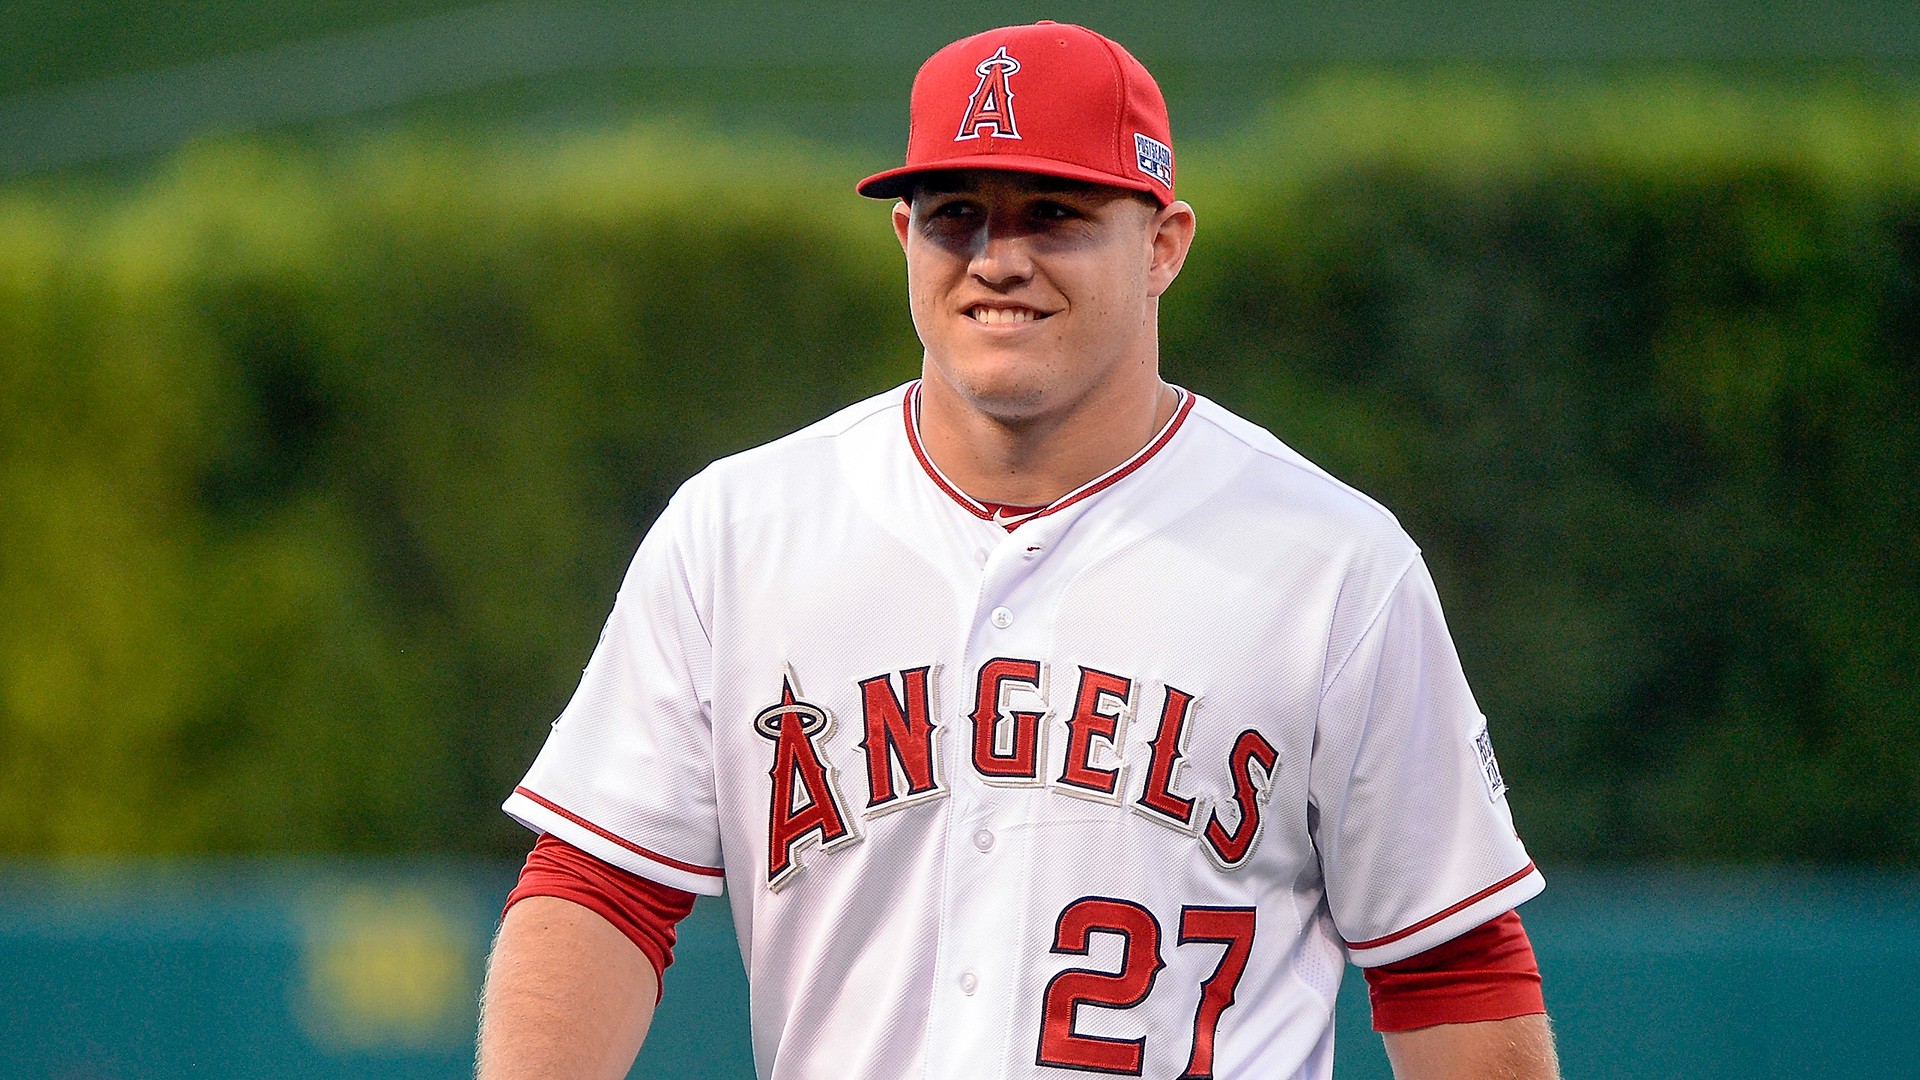 We learned Saturday that Angels superstar outfielder Mike Trout got engaged...